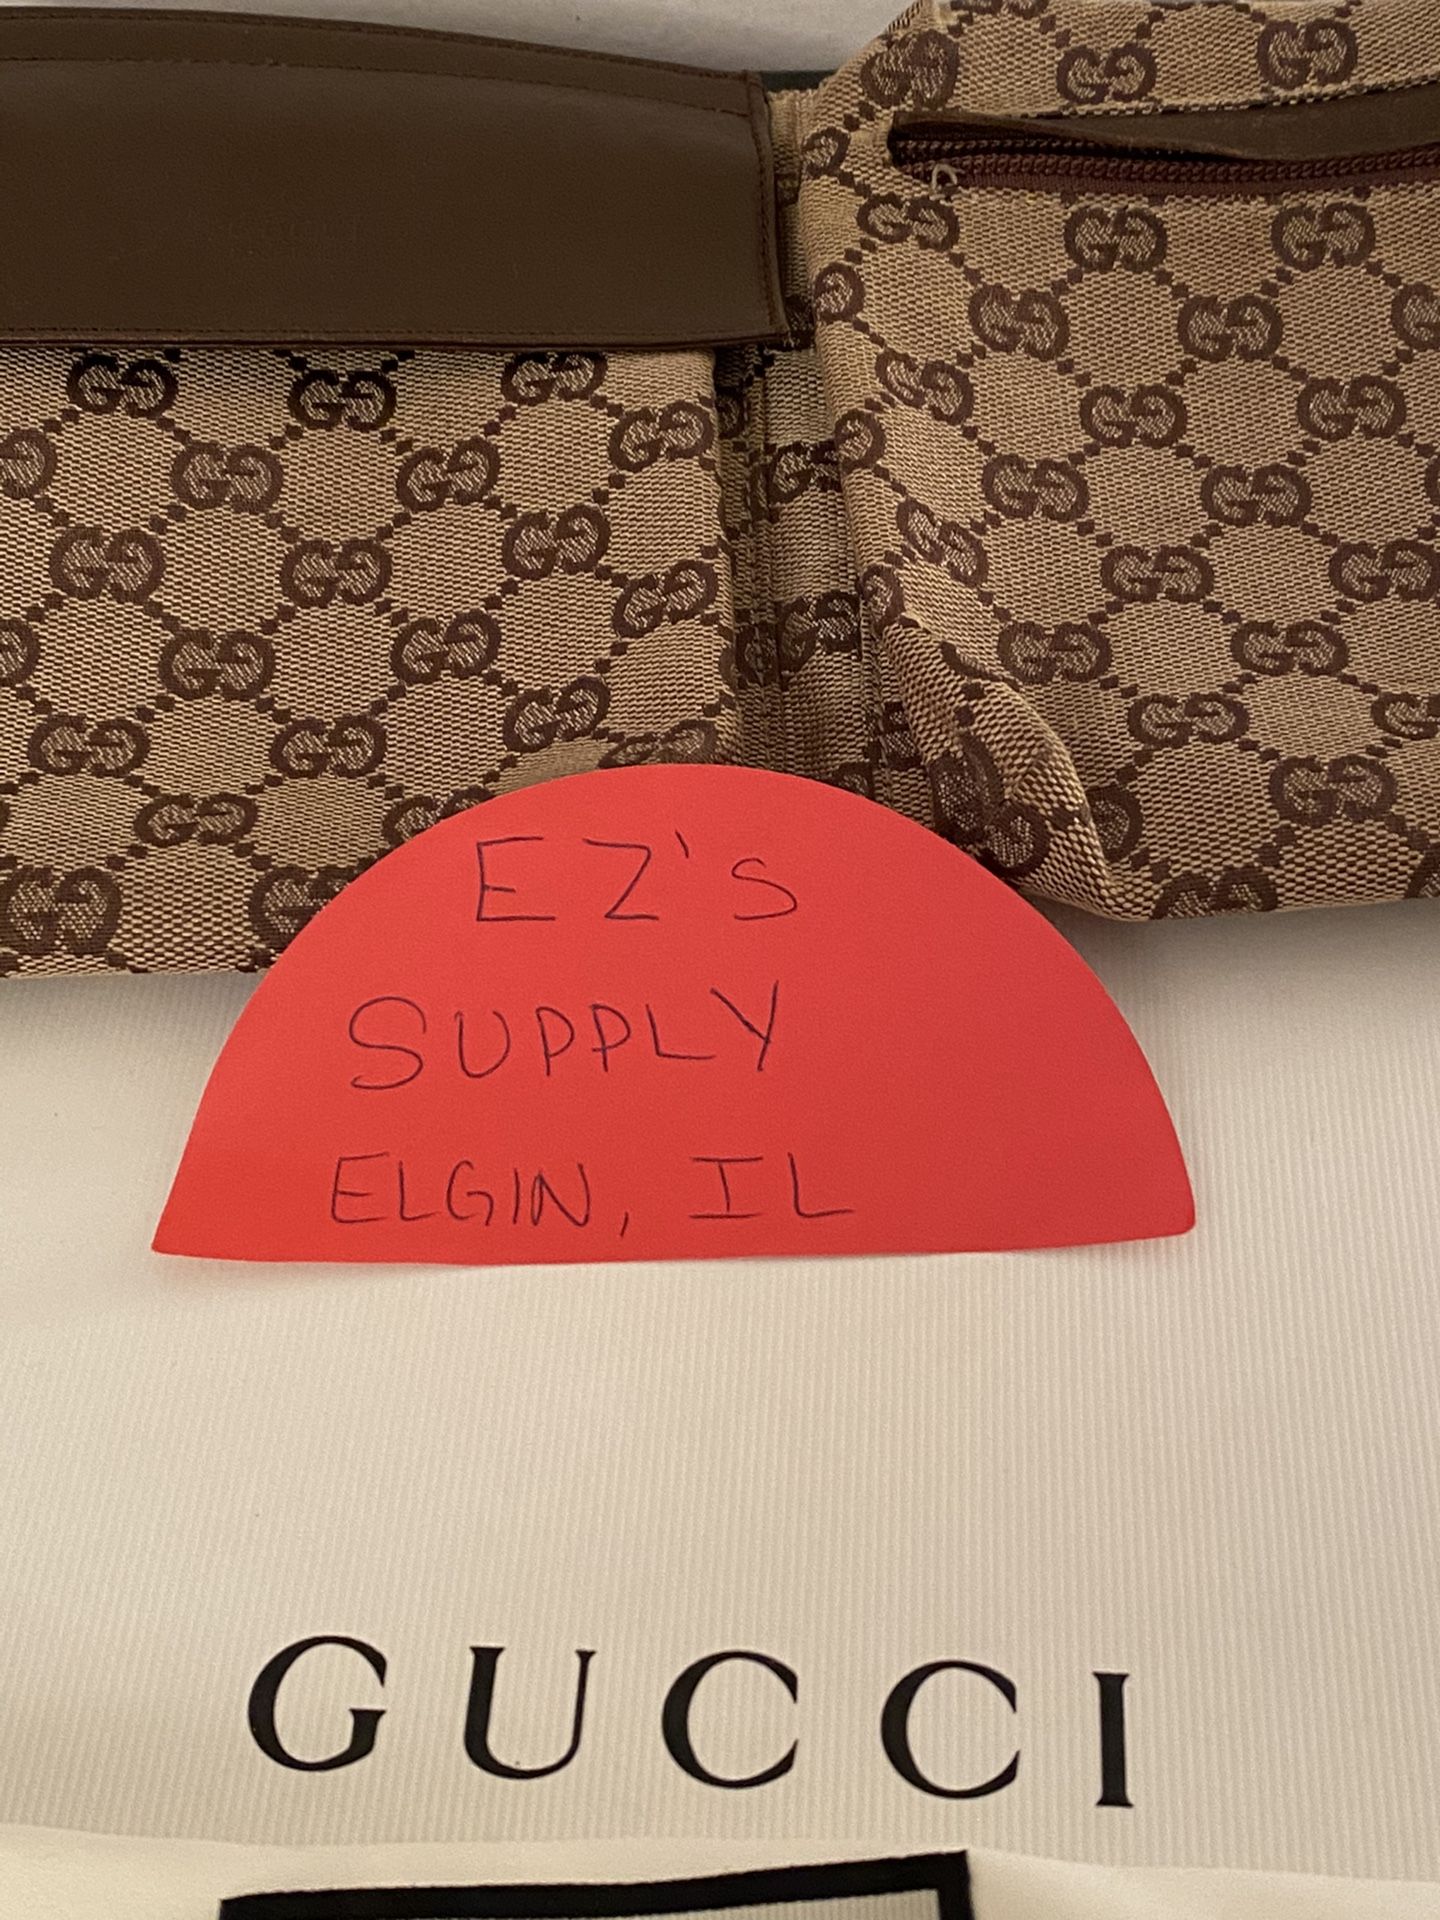 Authentic Cross body Gucci bag